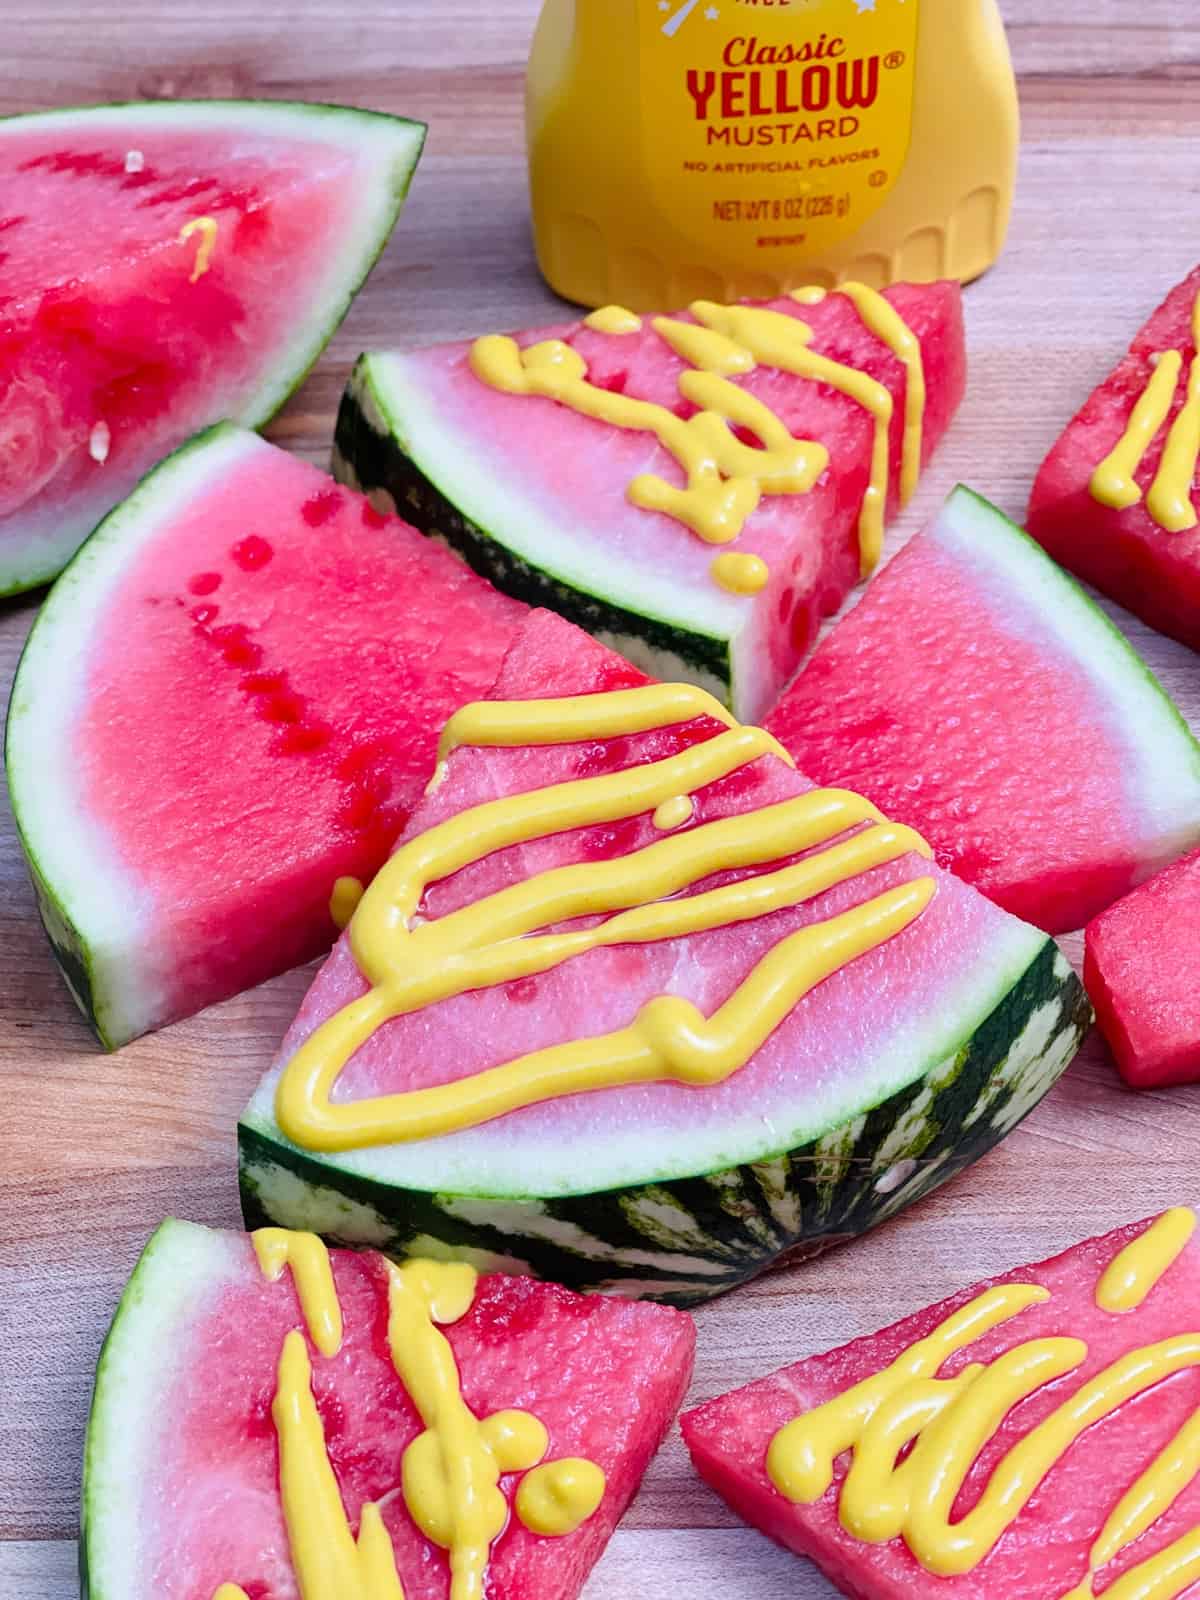 VIRAL TikTok Mustard on Watermelon Trend Tried by Lizzo – Is it Bussin’ or is it Disgustin’?